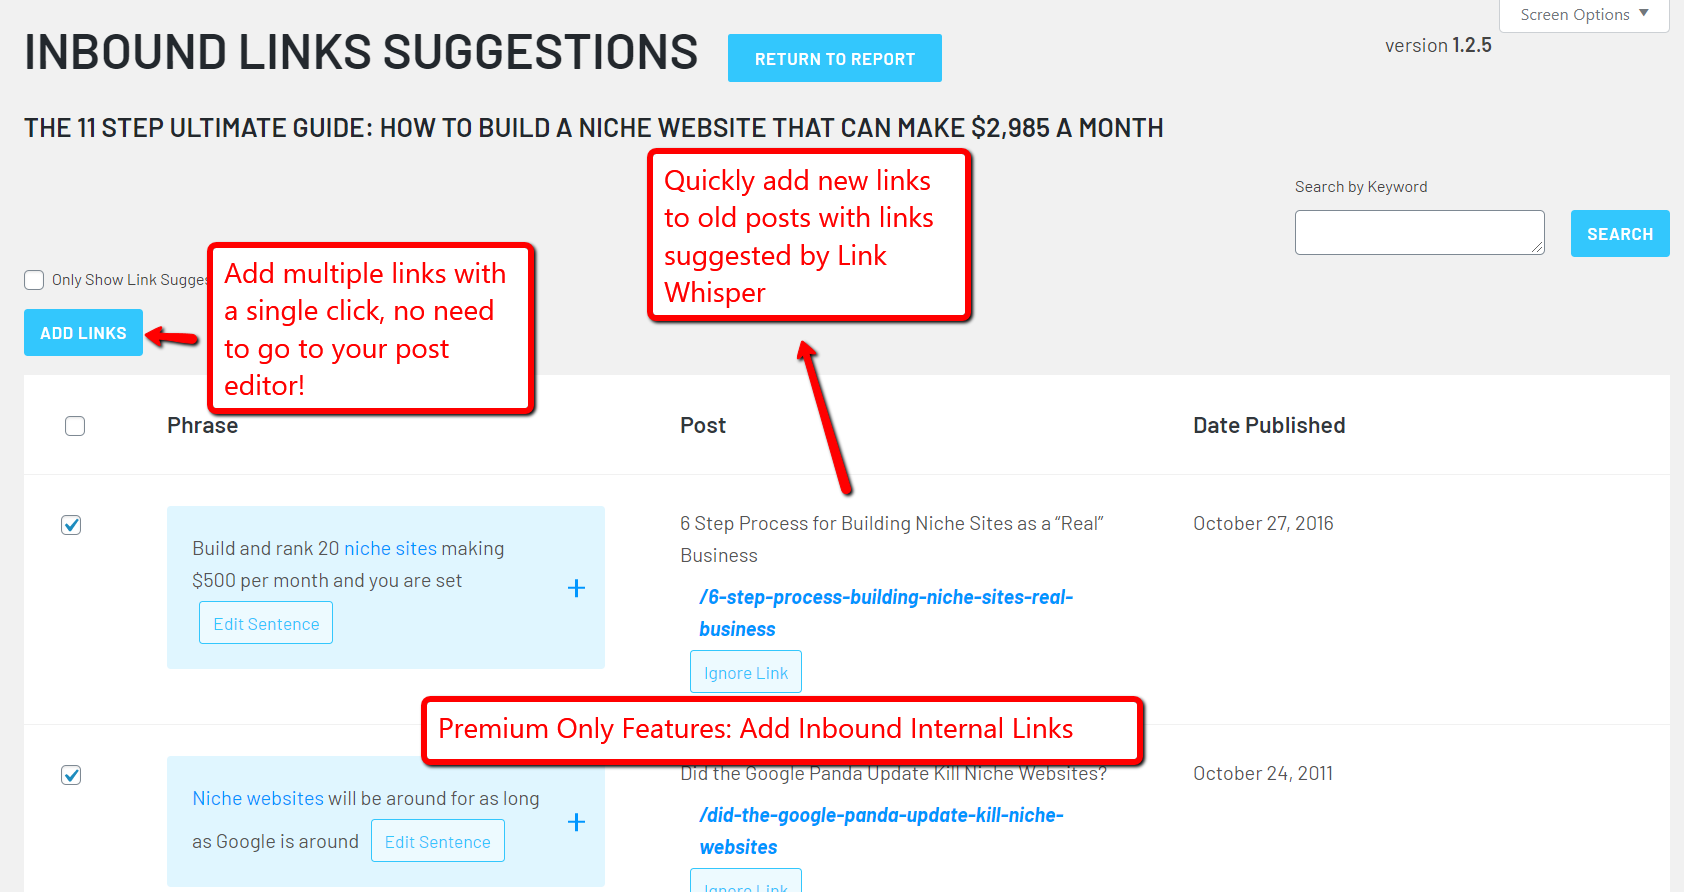 [Premium] The Inbound Links Suggestion page allows you to make multipe links to a single post from across your whole site.